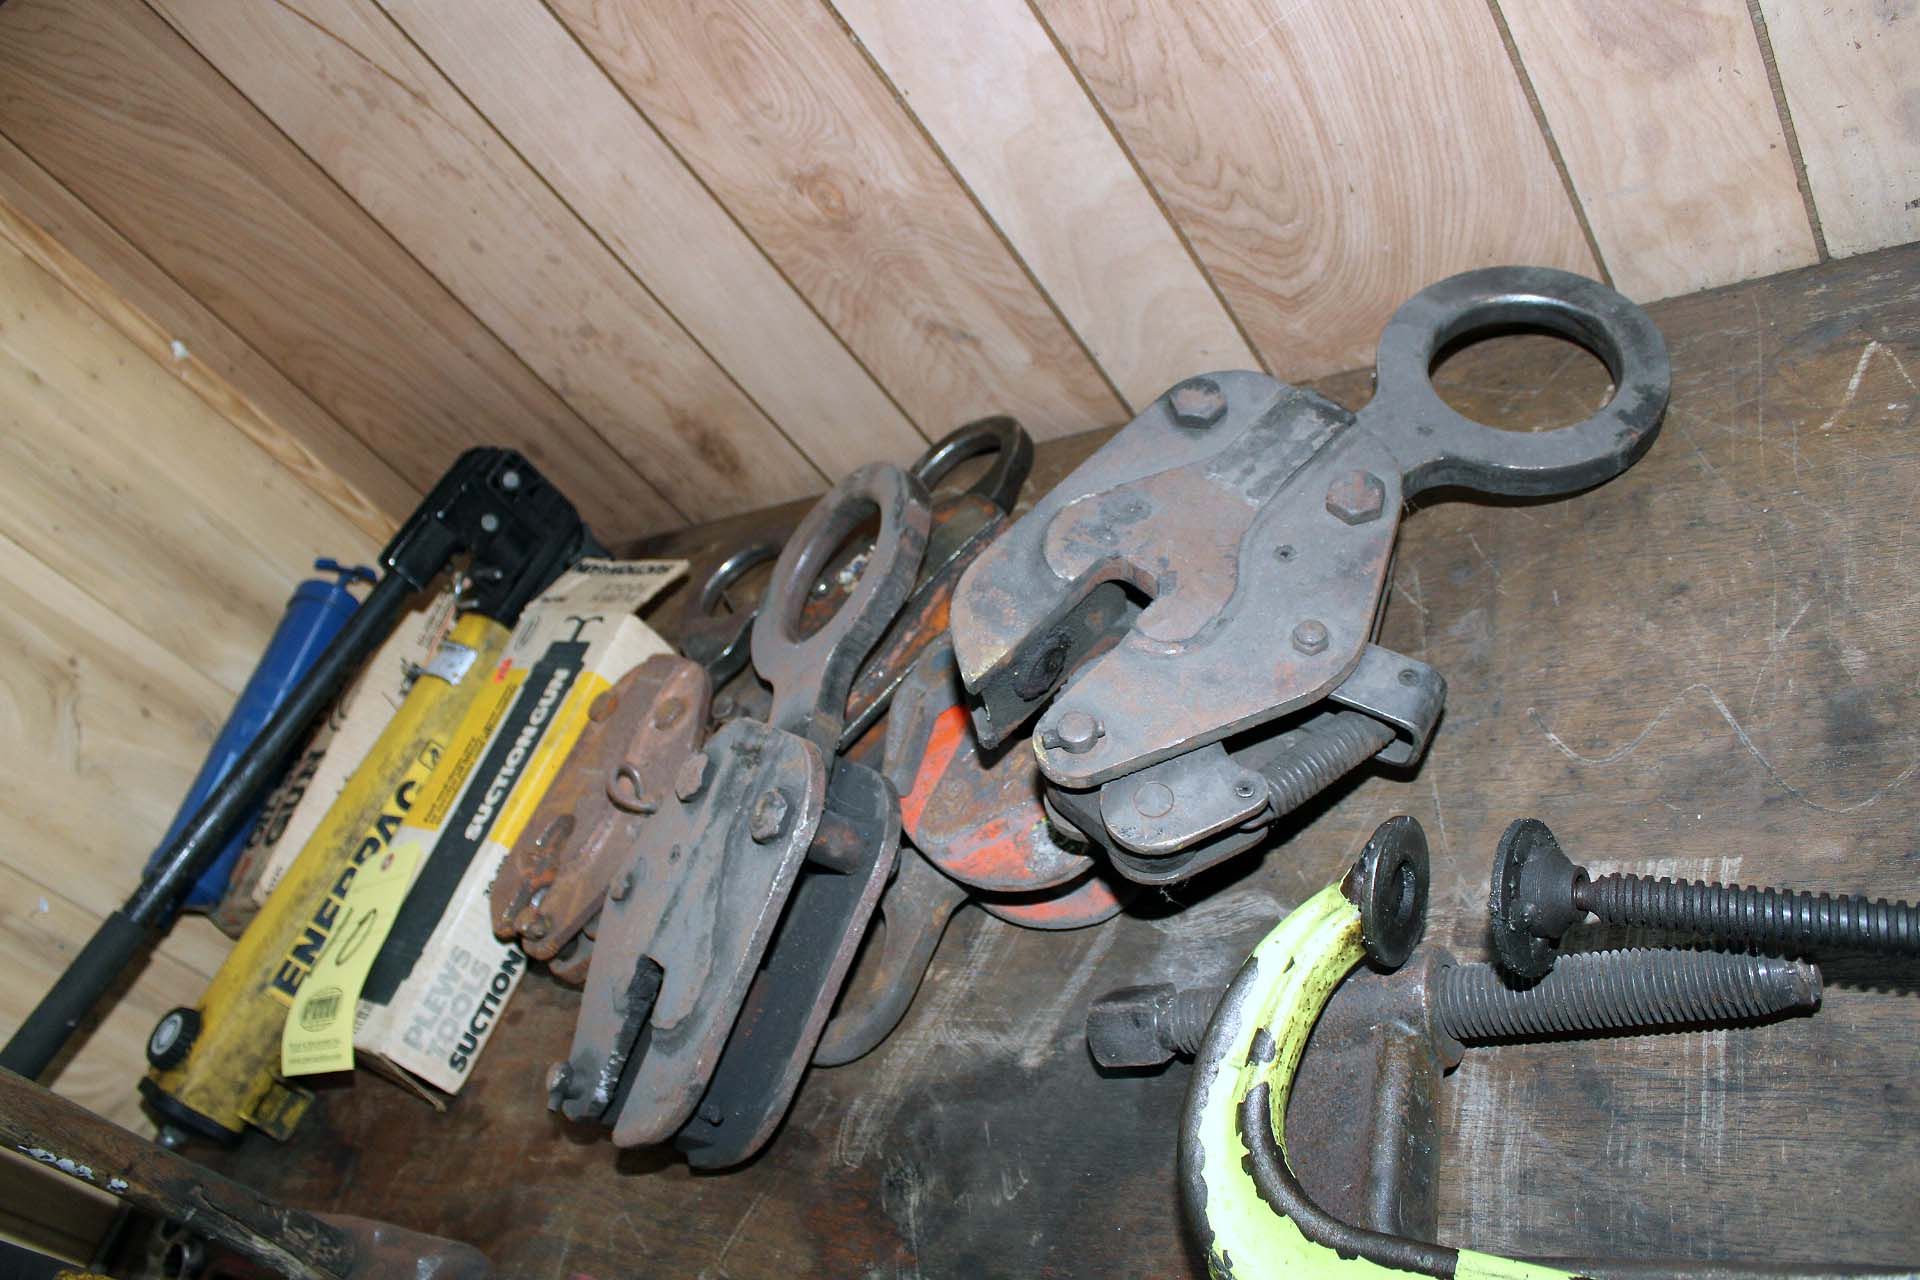 LOT CONSISTING OF: (1) Enerpac hand pump, (2) suction guns, (2) 1" plate clamps, (3) 1-1/2" plate - Bild 2 aus 4